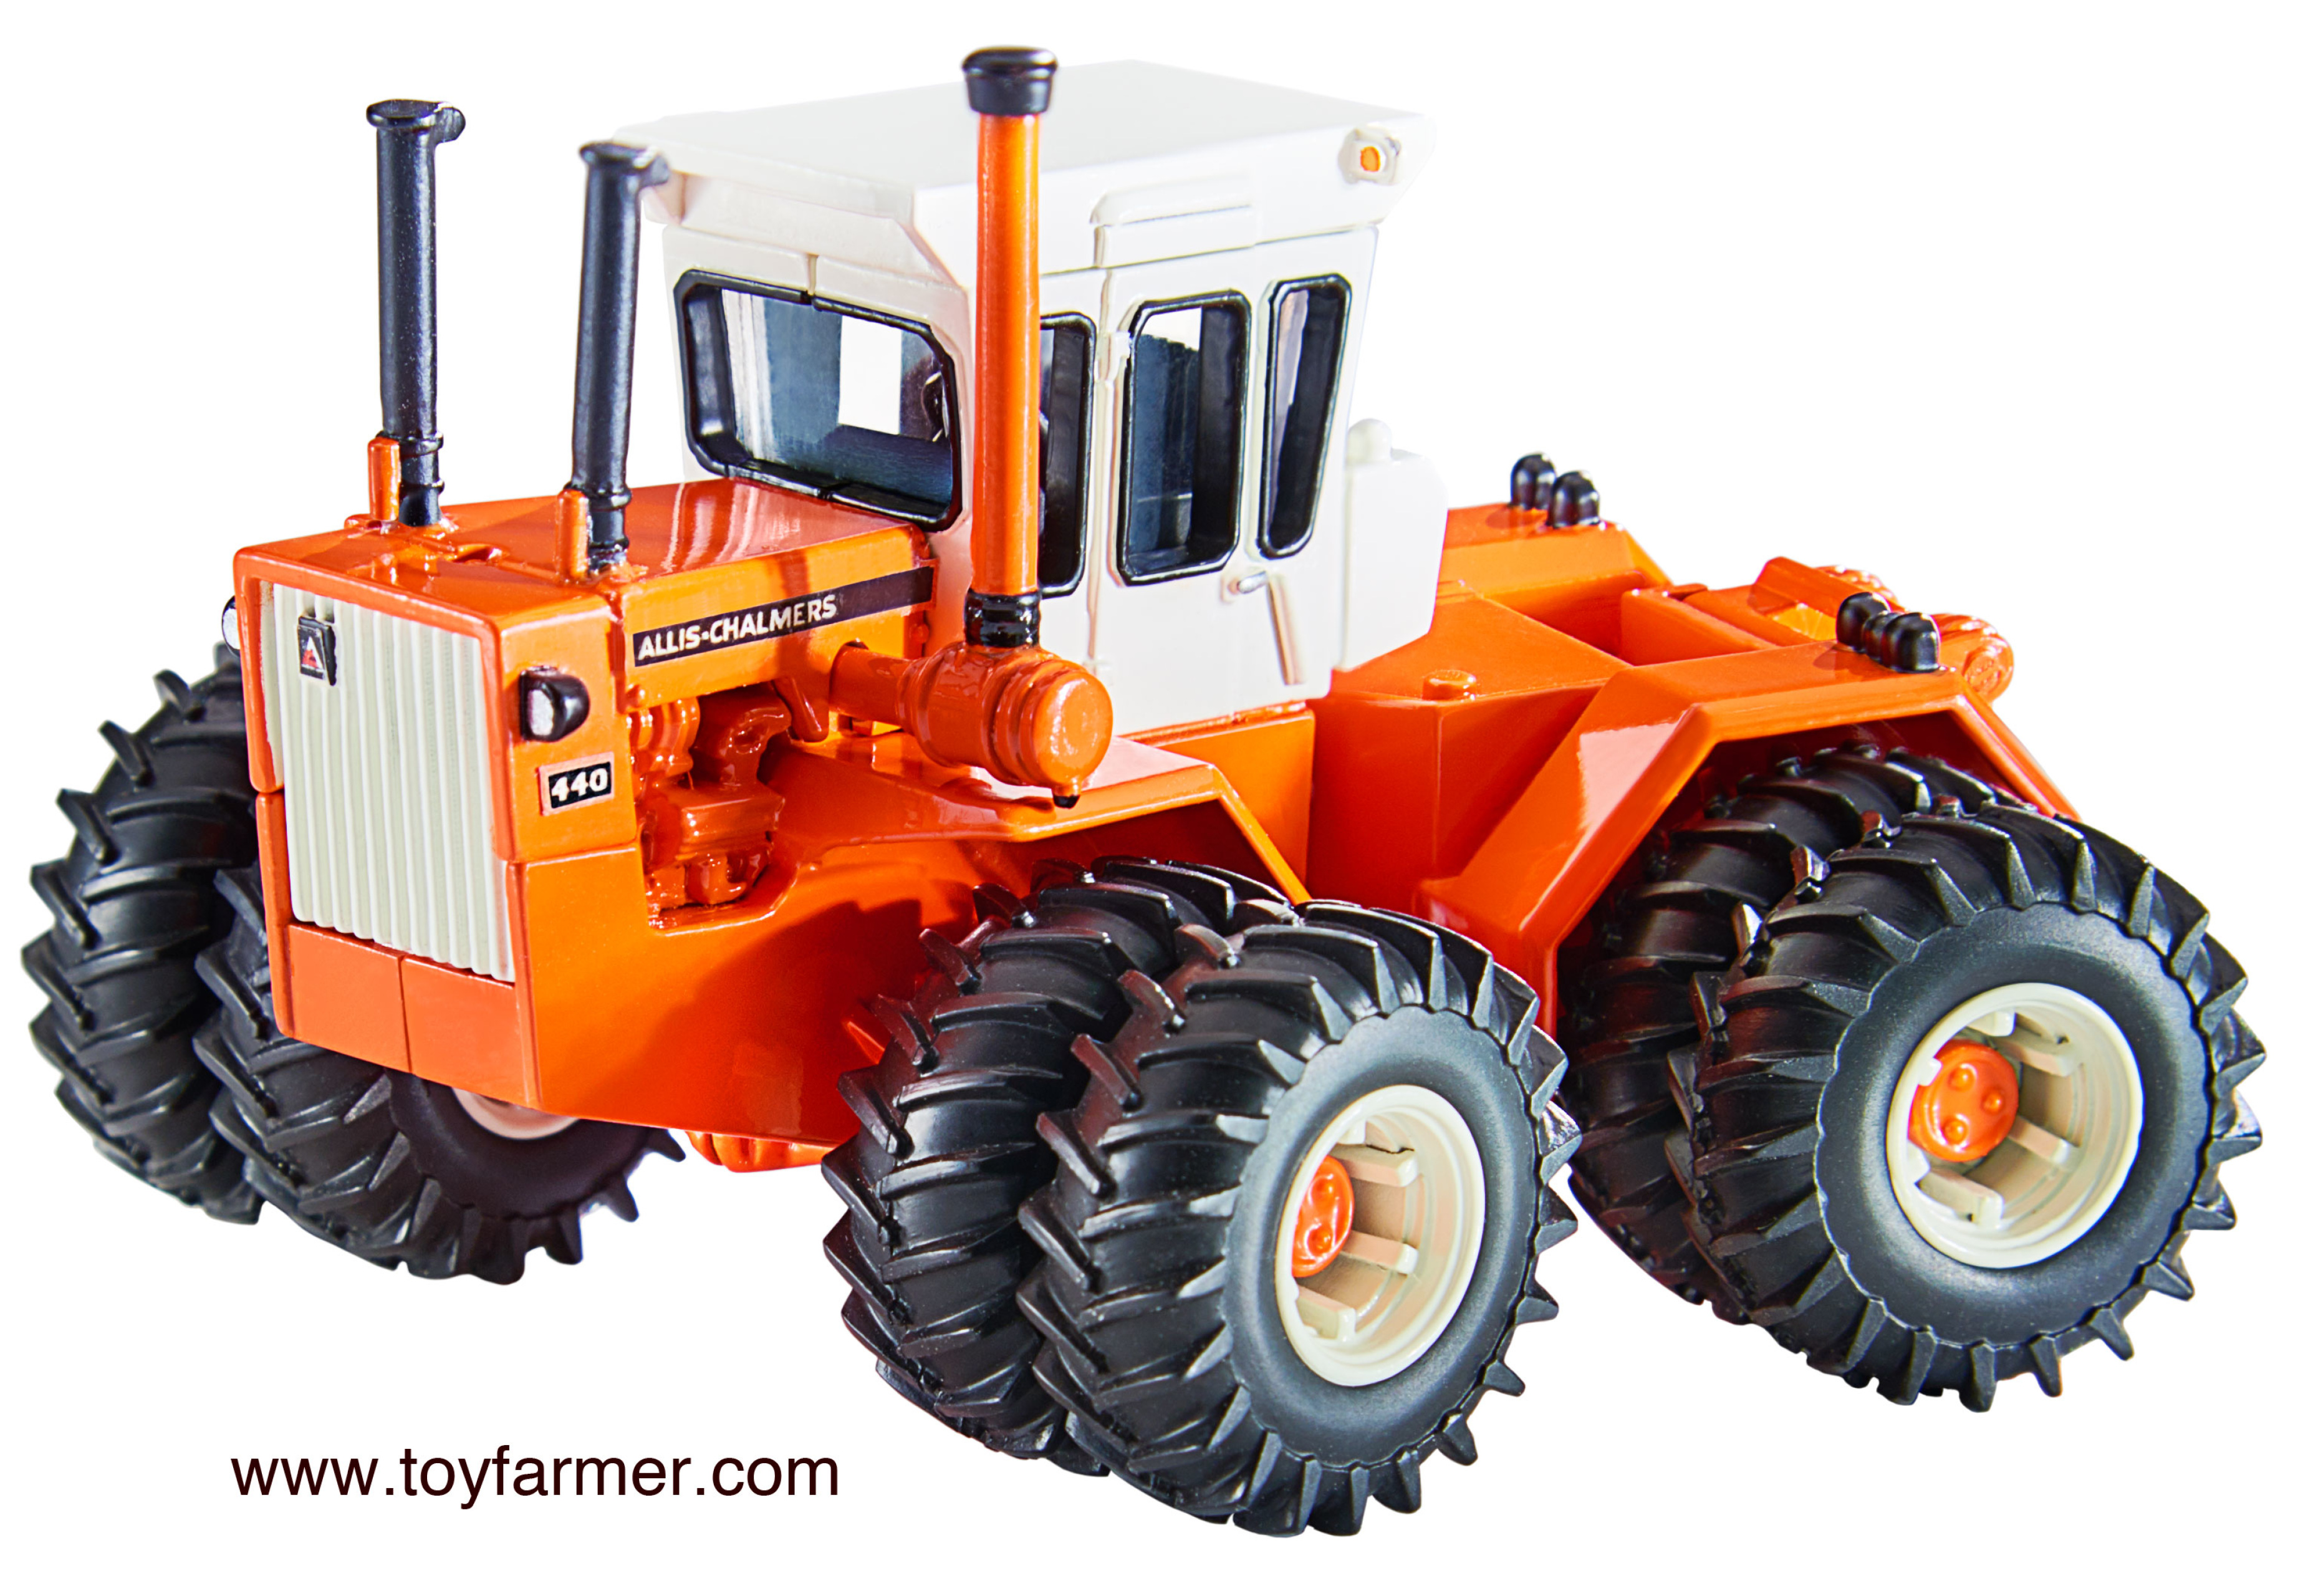 Allis-Chalmers 440, 2017 National Farm Toy Show, 1:64 scale